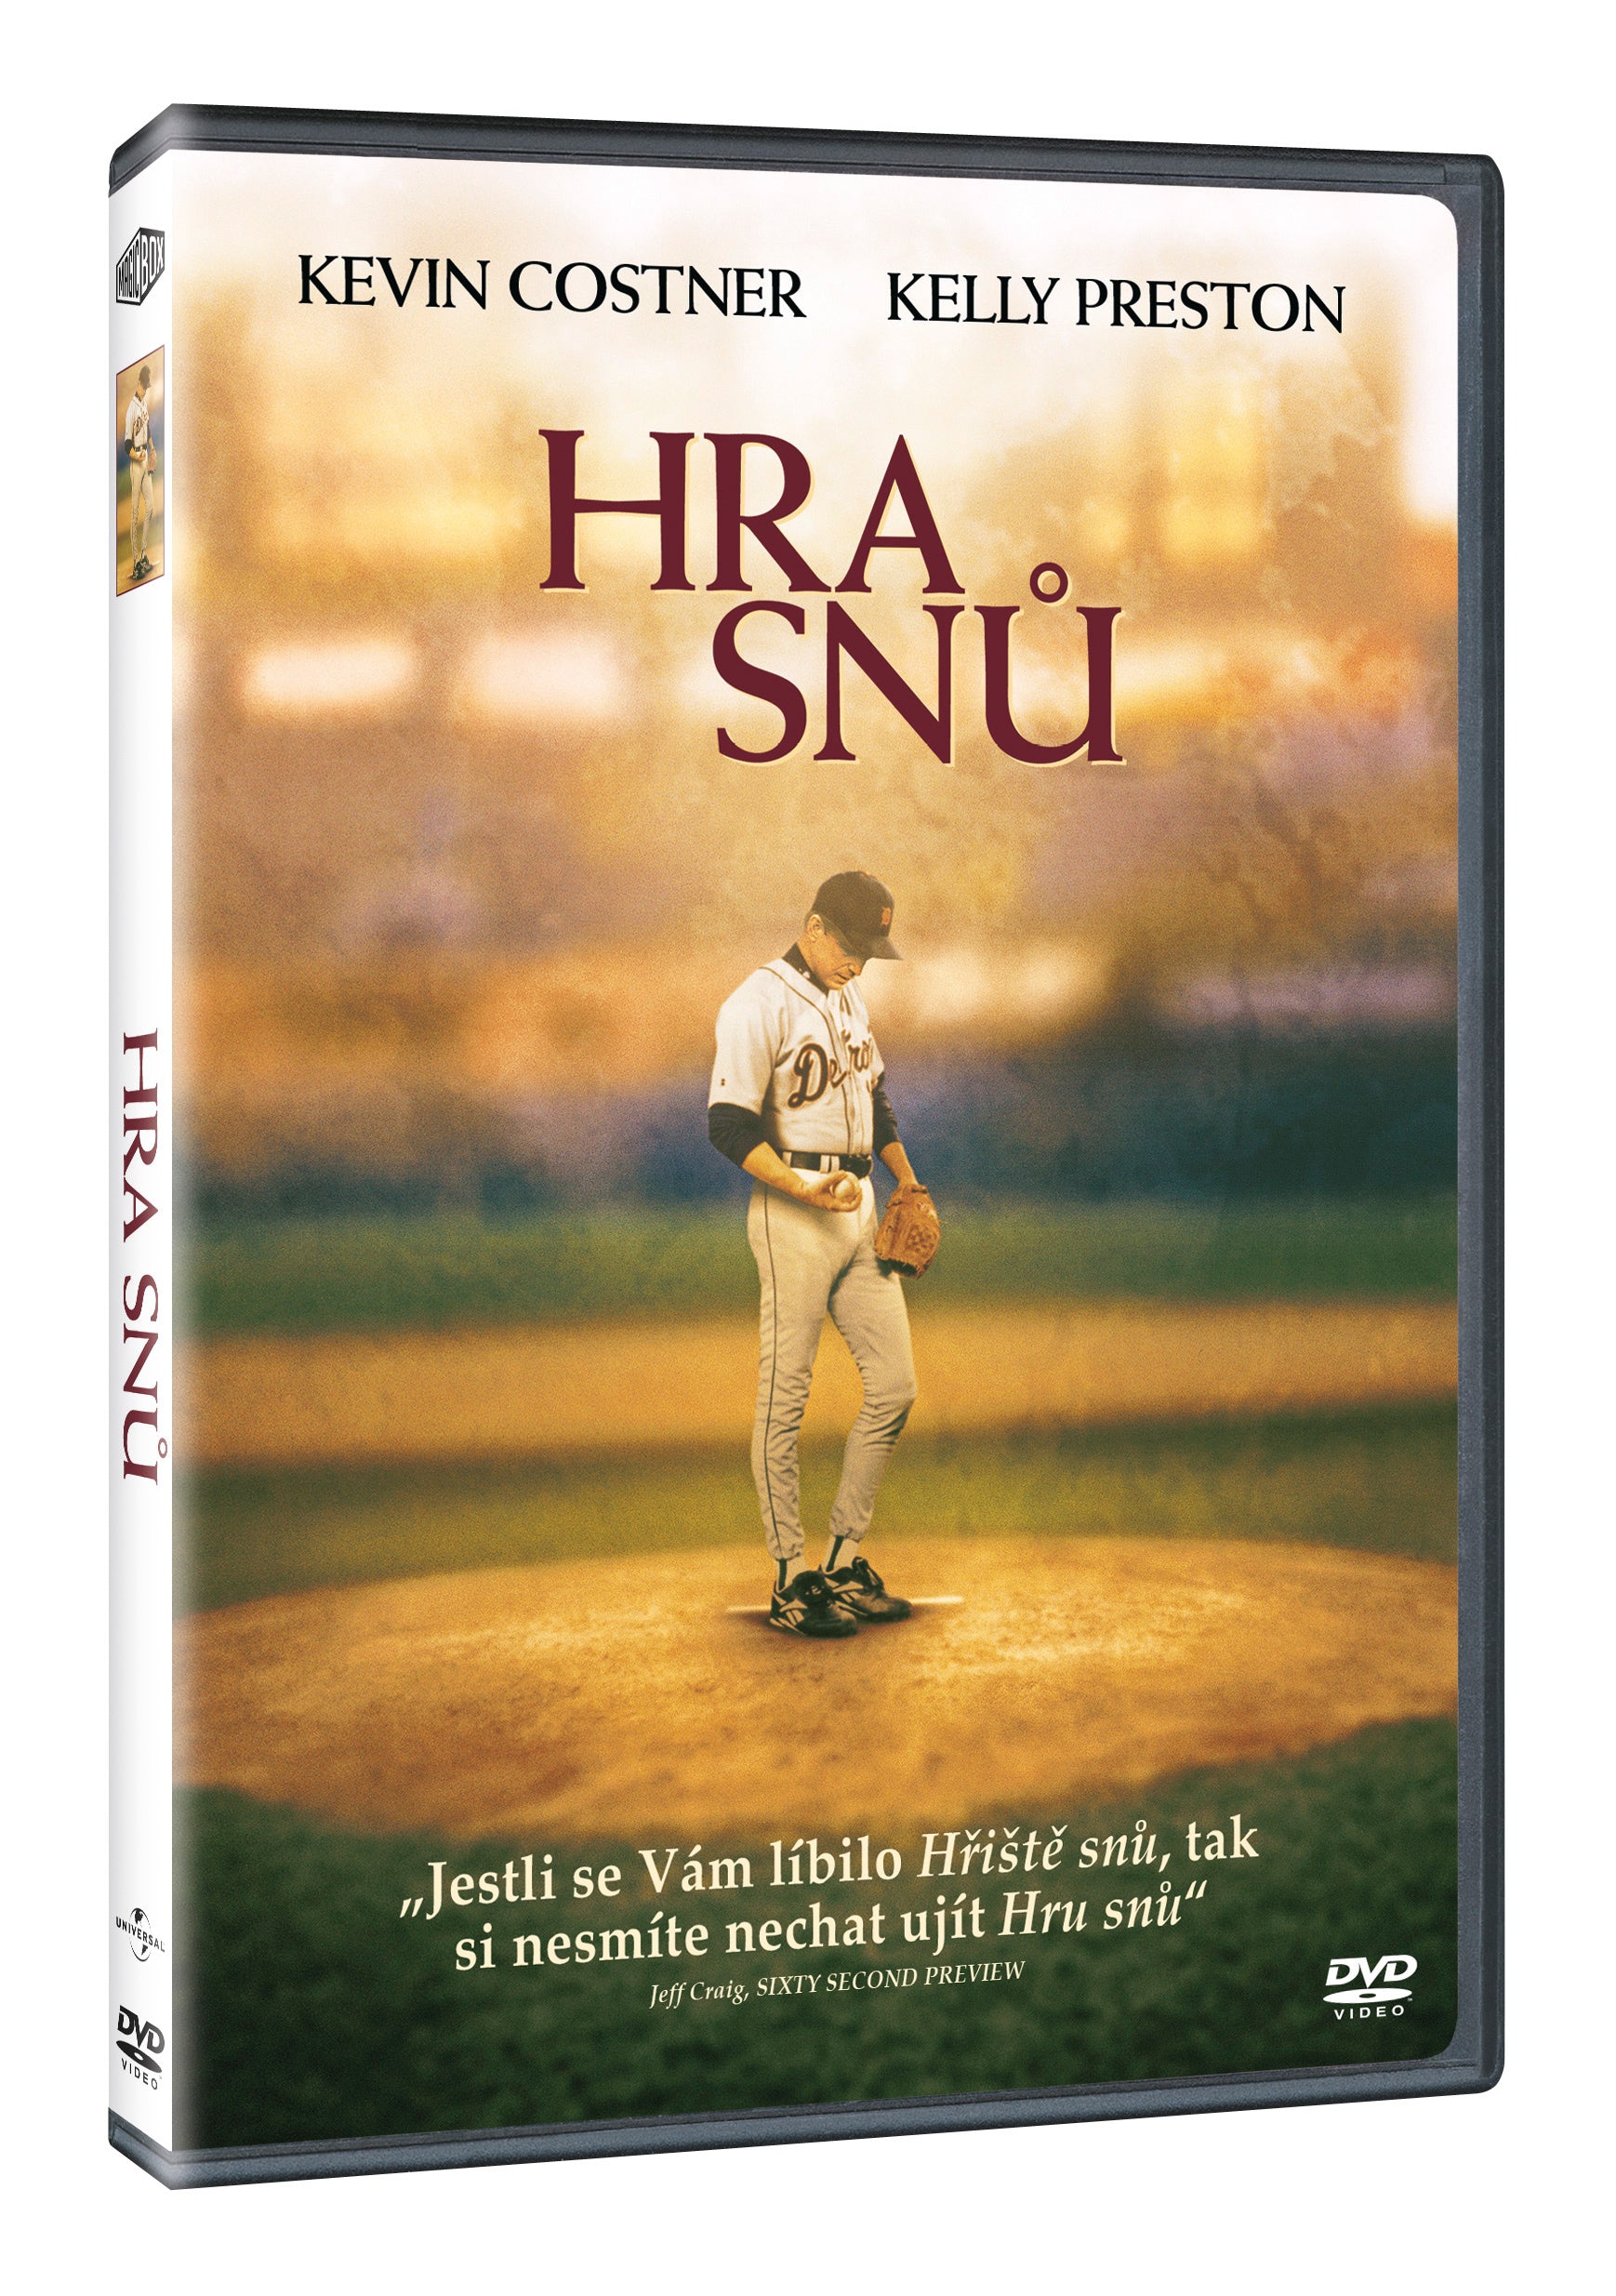 Hra snu DVD / For Love of the Game